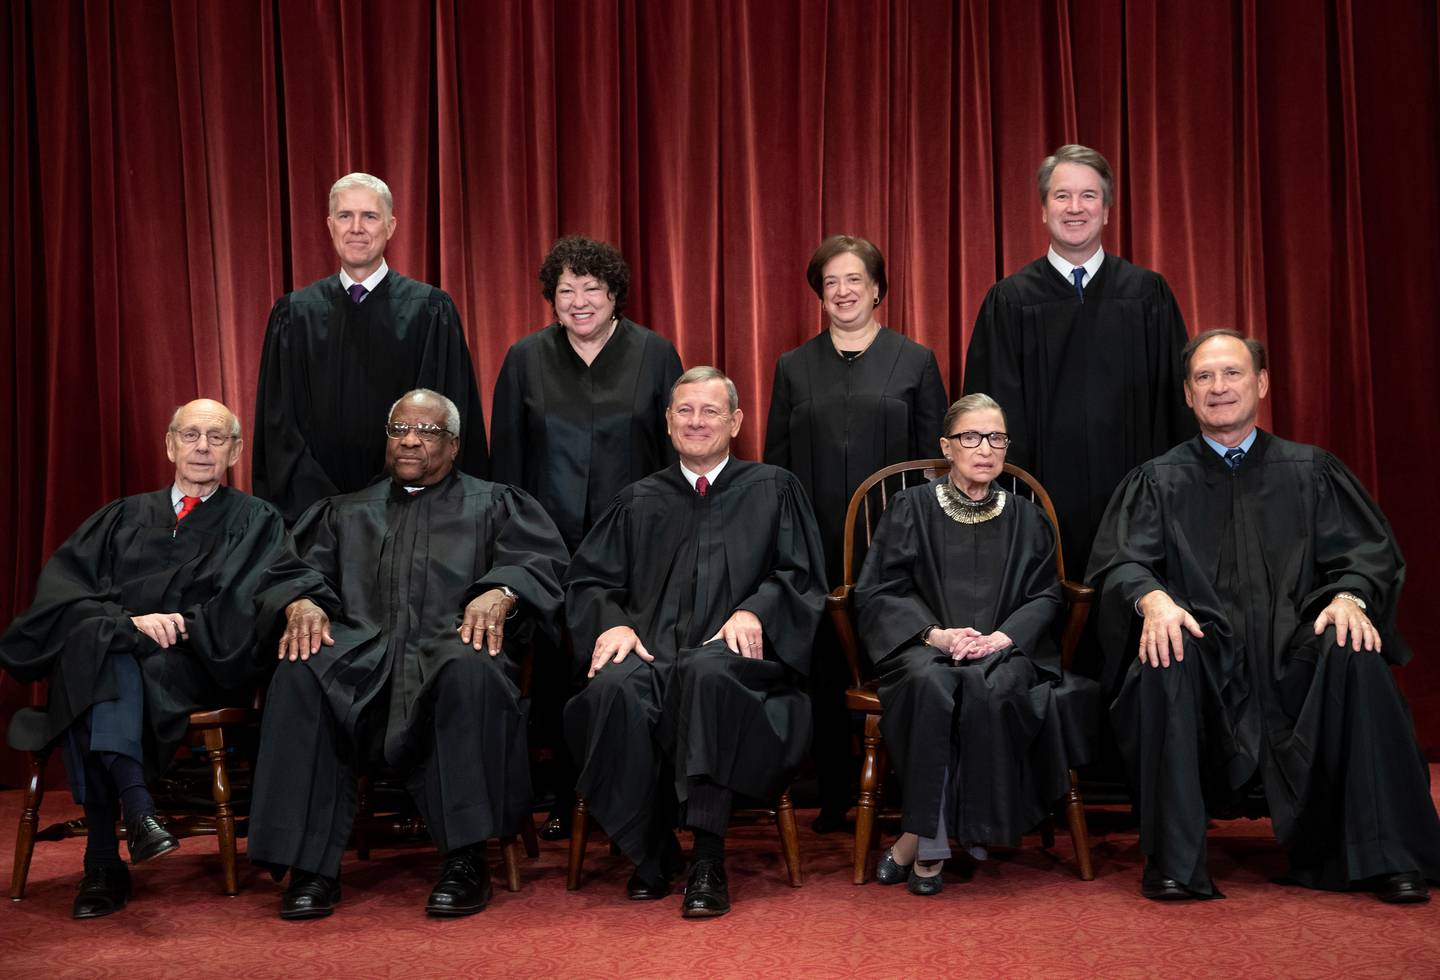 FILE - In this Nov. 30, 2018, file photo, the justices of the U.S. Supreme Court gather for a formal group portrait to include the new Associate Justice, top row, far right, at the Supreme Court building in Washington. Seated from left: Associate Justice Stephen Breyer, Associate Justice Clarence Thomas, Chief Justice of the United States John G. Roberts, Associate Justice Ruth Bader Ginsburg and Associate Justice Samuel Alito Jr. Standing behind from left: Associate Justice Neil Gorsuch, Associate Justice Sonia Sotomayor, Associate Justice Elena Kagan and Associate Justice Brett M. Kavanaugh. Its the time of the year when Supreme Court justices can get testy, but they might have to find a new way to show it. (AP Photo/J. Scott Applewhite, File)